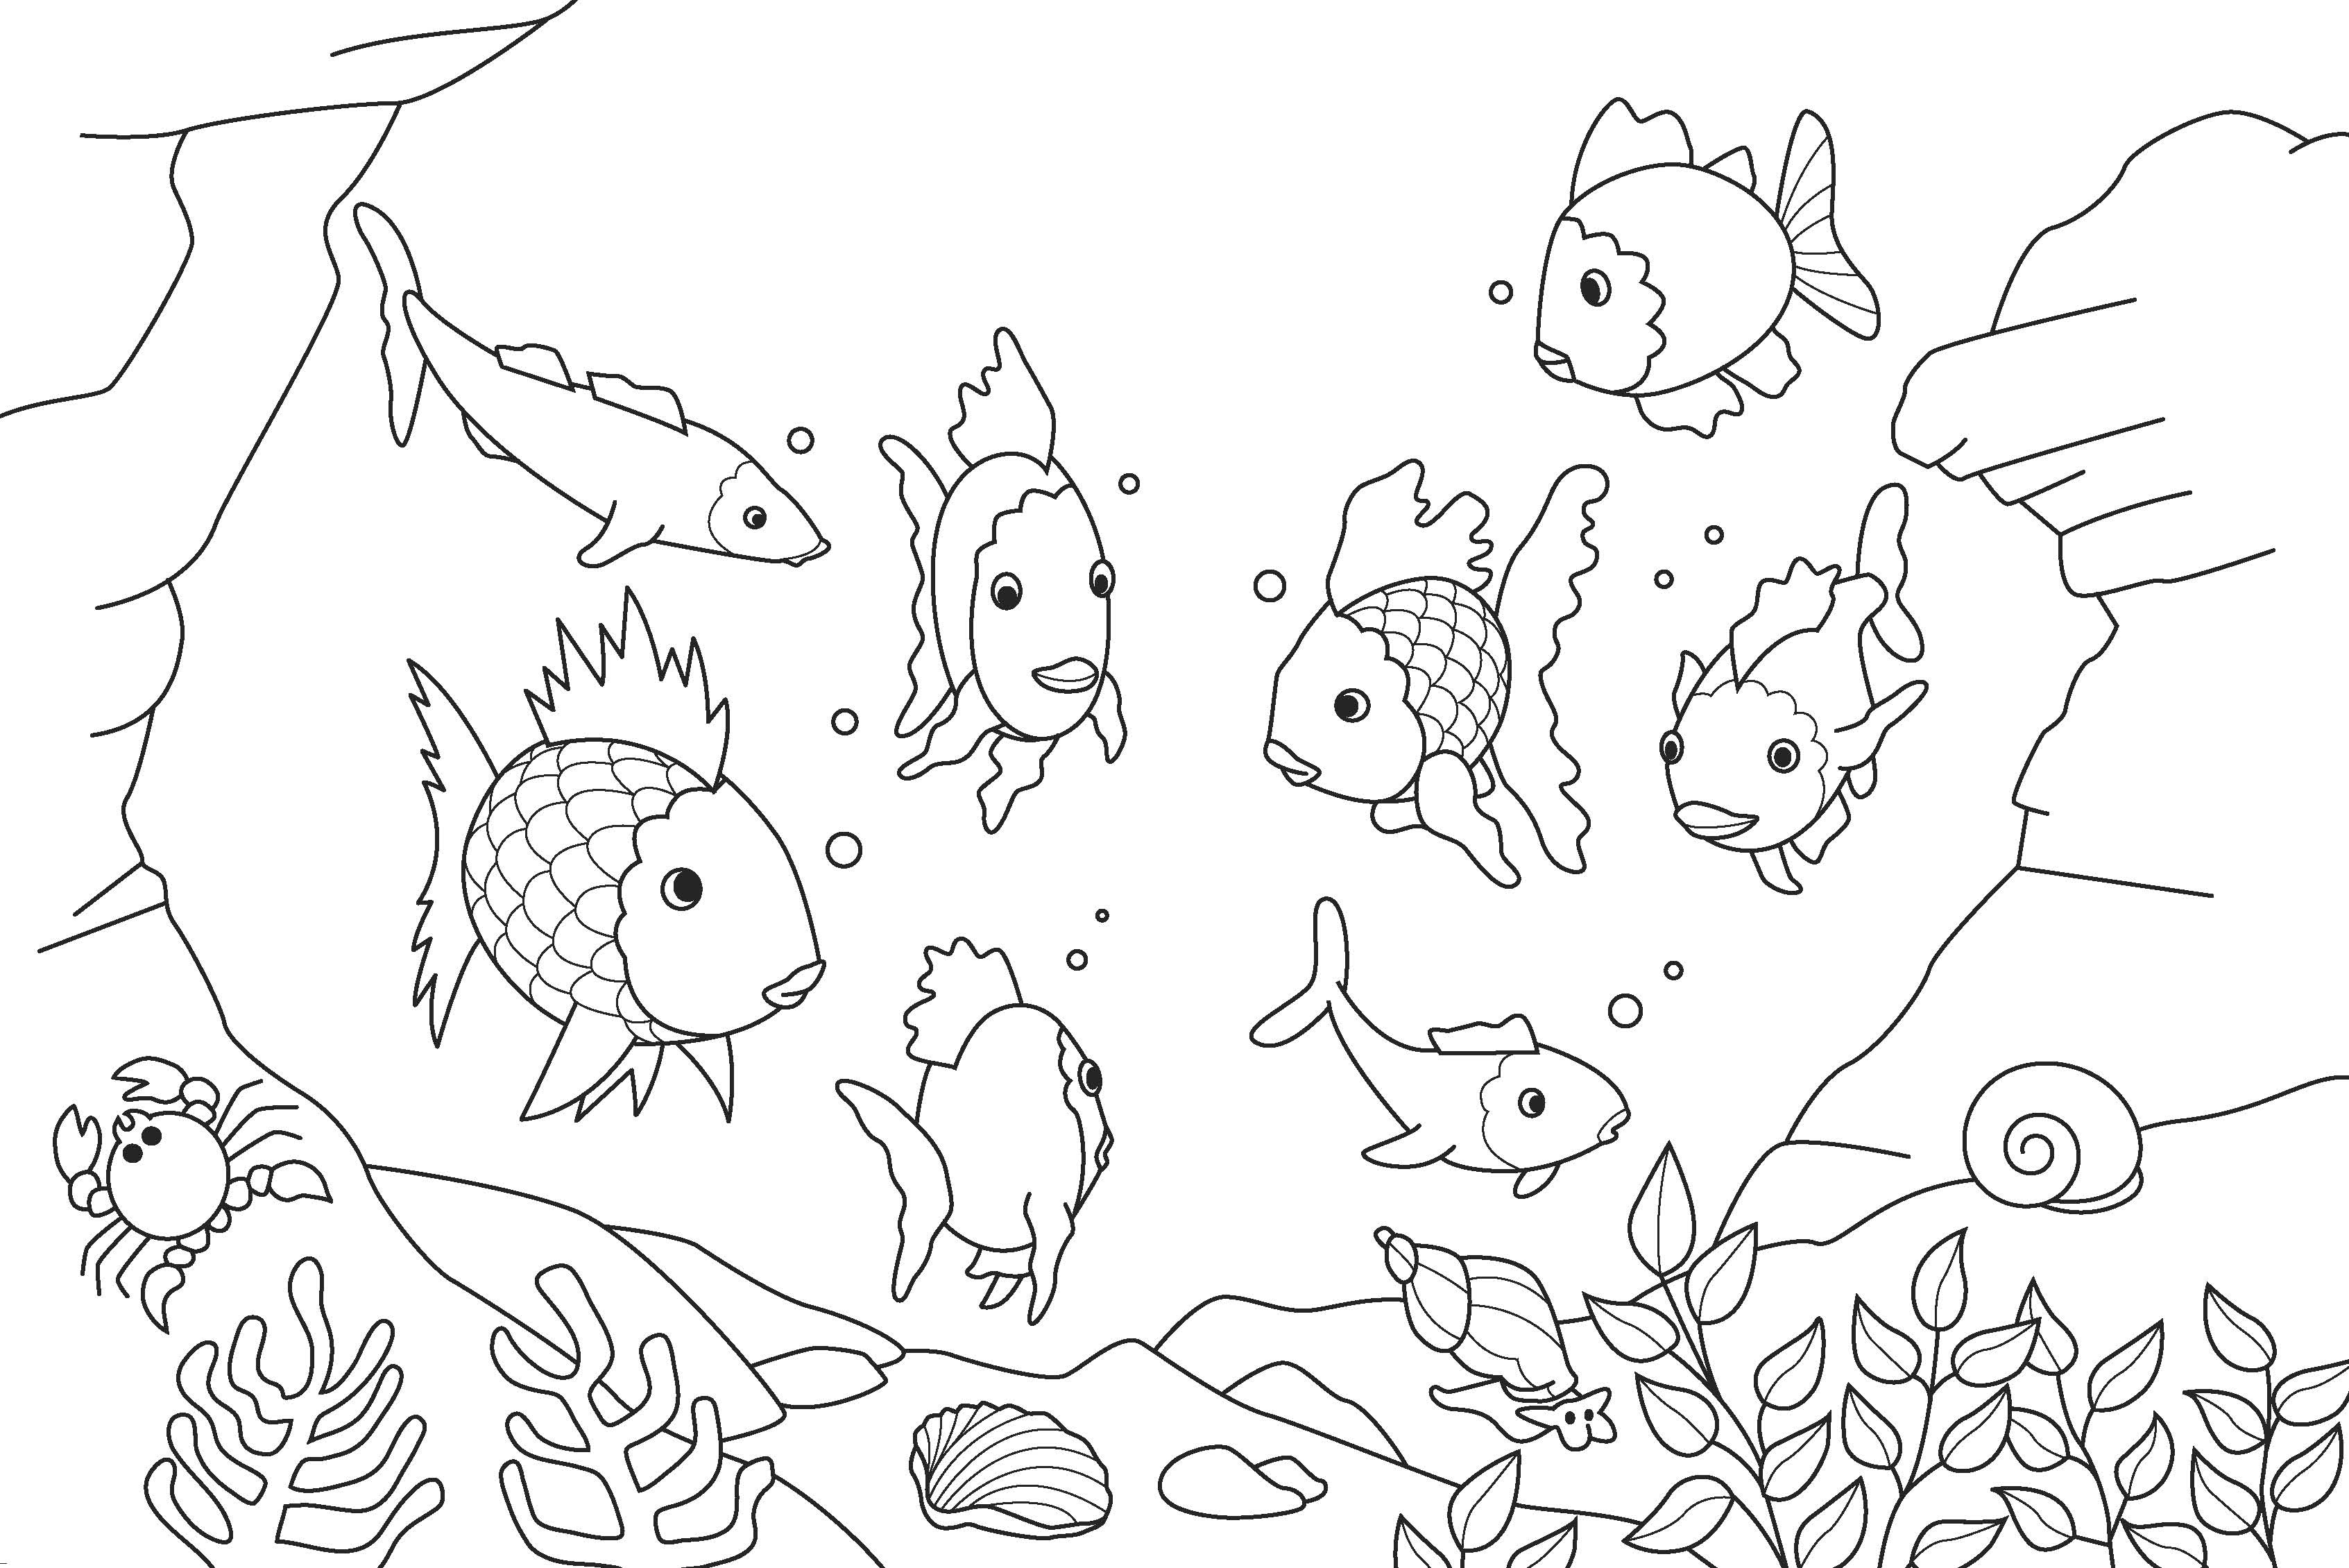 Free Printable Fish Coloring Pages For Kids - Free Printable Fish Coloring Pages